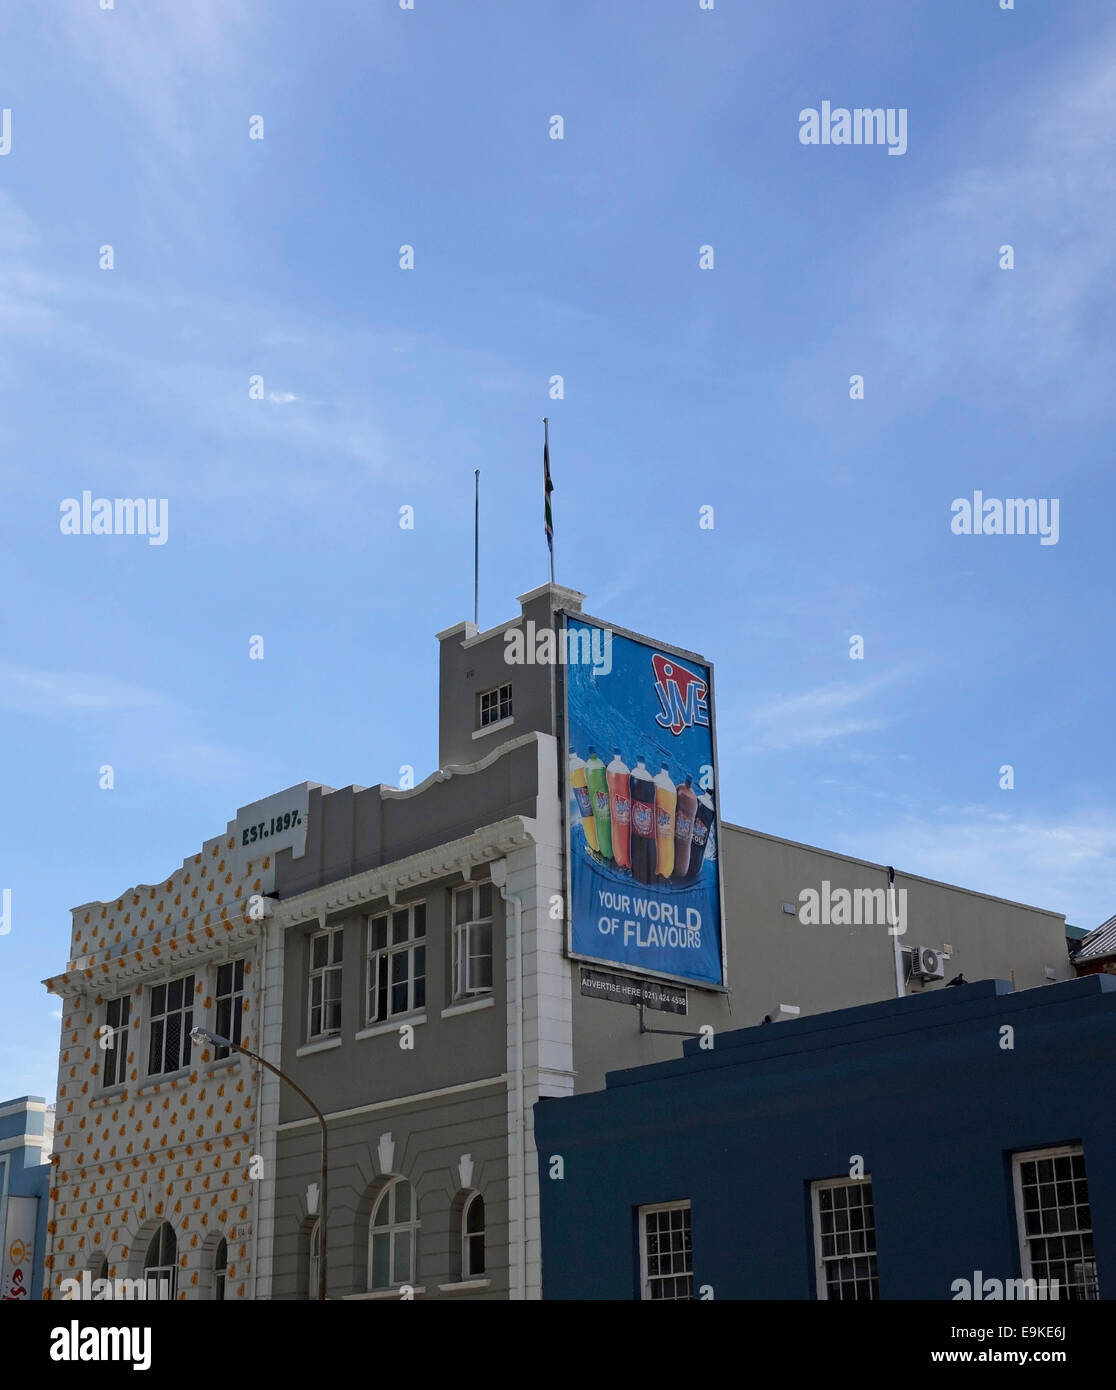 Large 'Jive' advertisement on a building in Loop Street, Cape Town, South Africa. Stock Photo